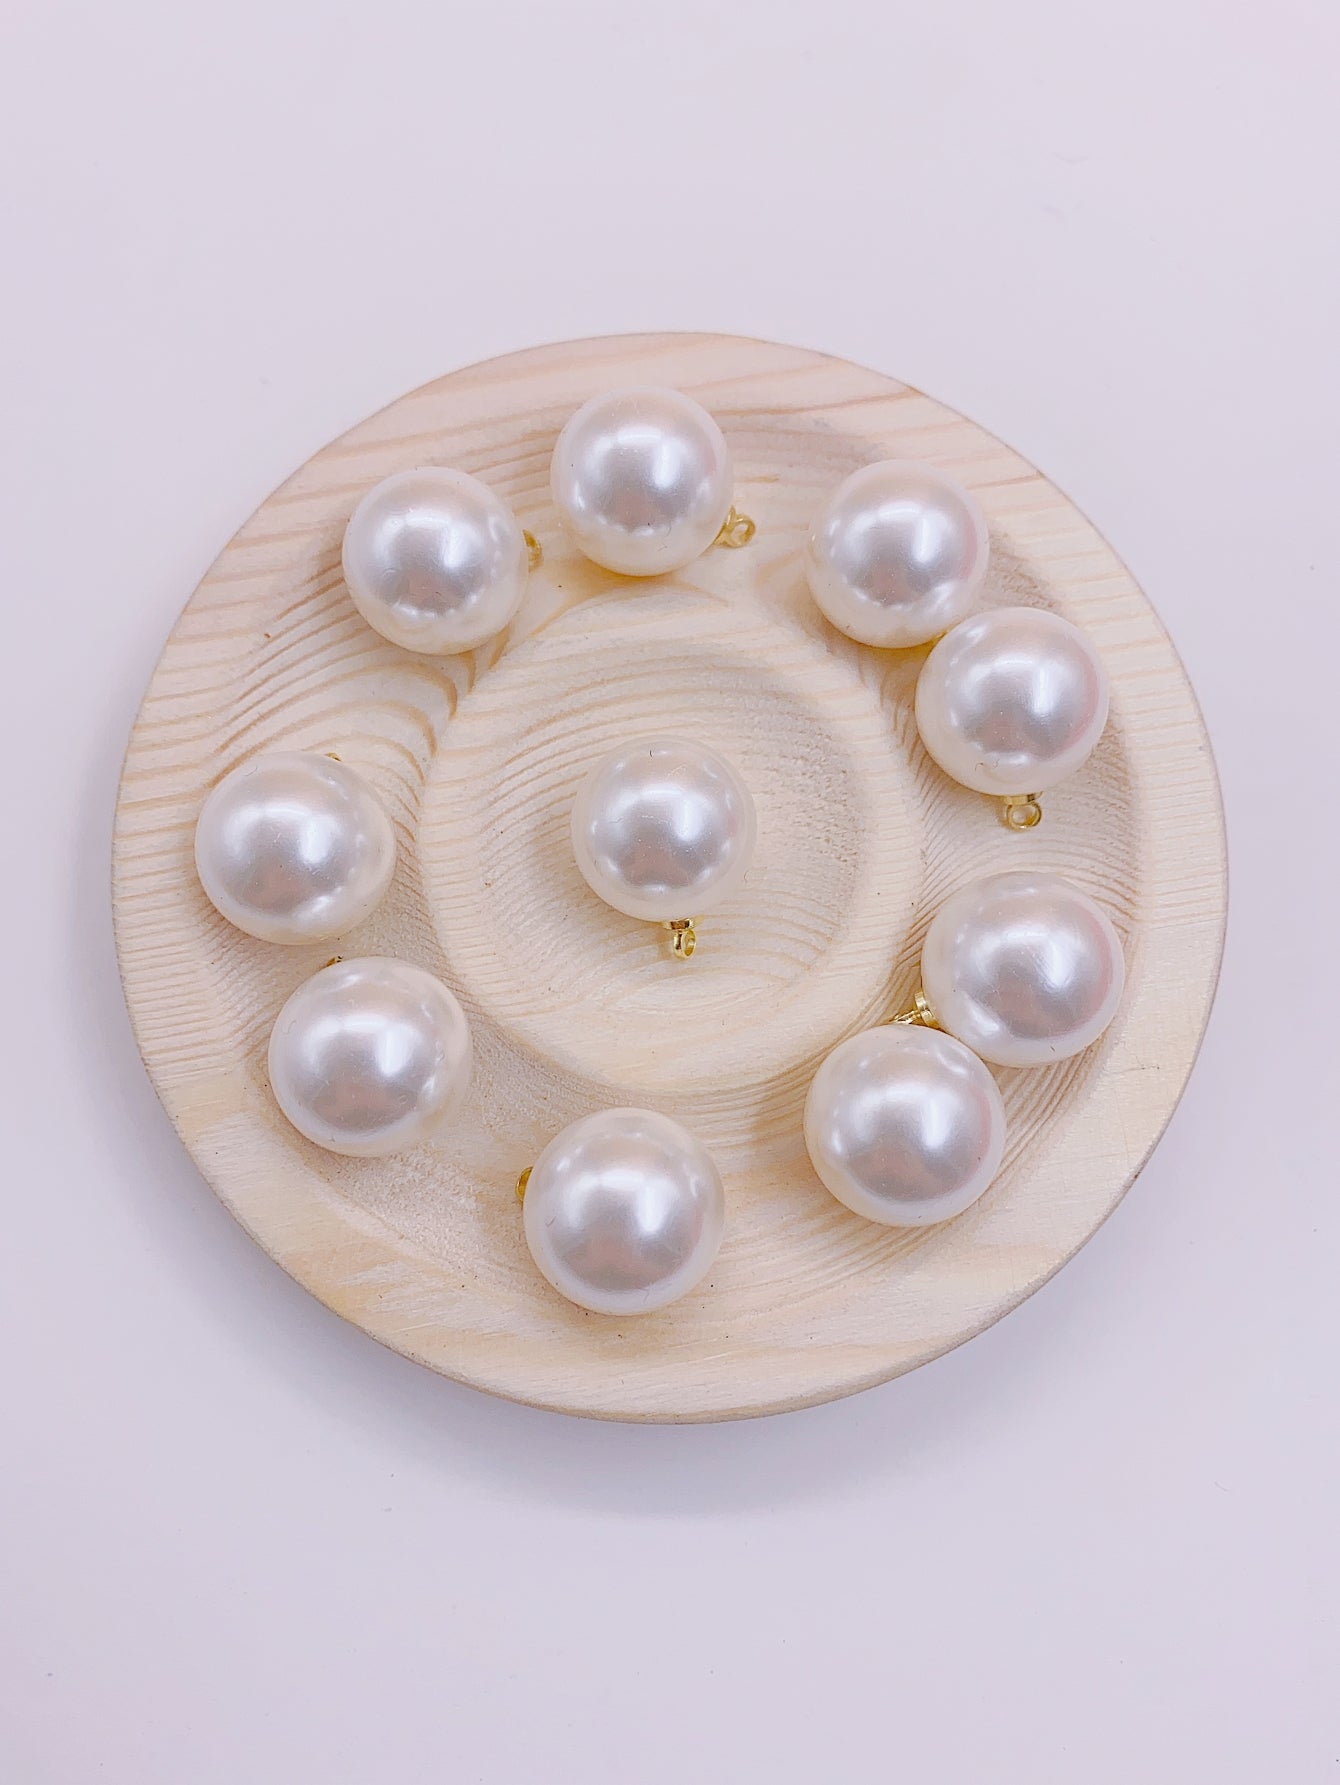 Factory spot water grinding bright ABS imitation pearl pendant necklace pendant diy accessories accessories clothing accessories